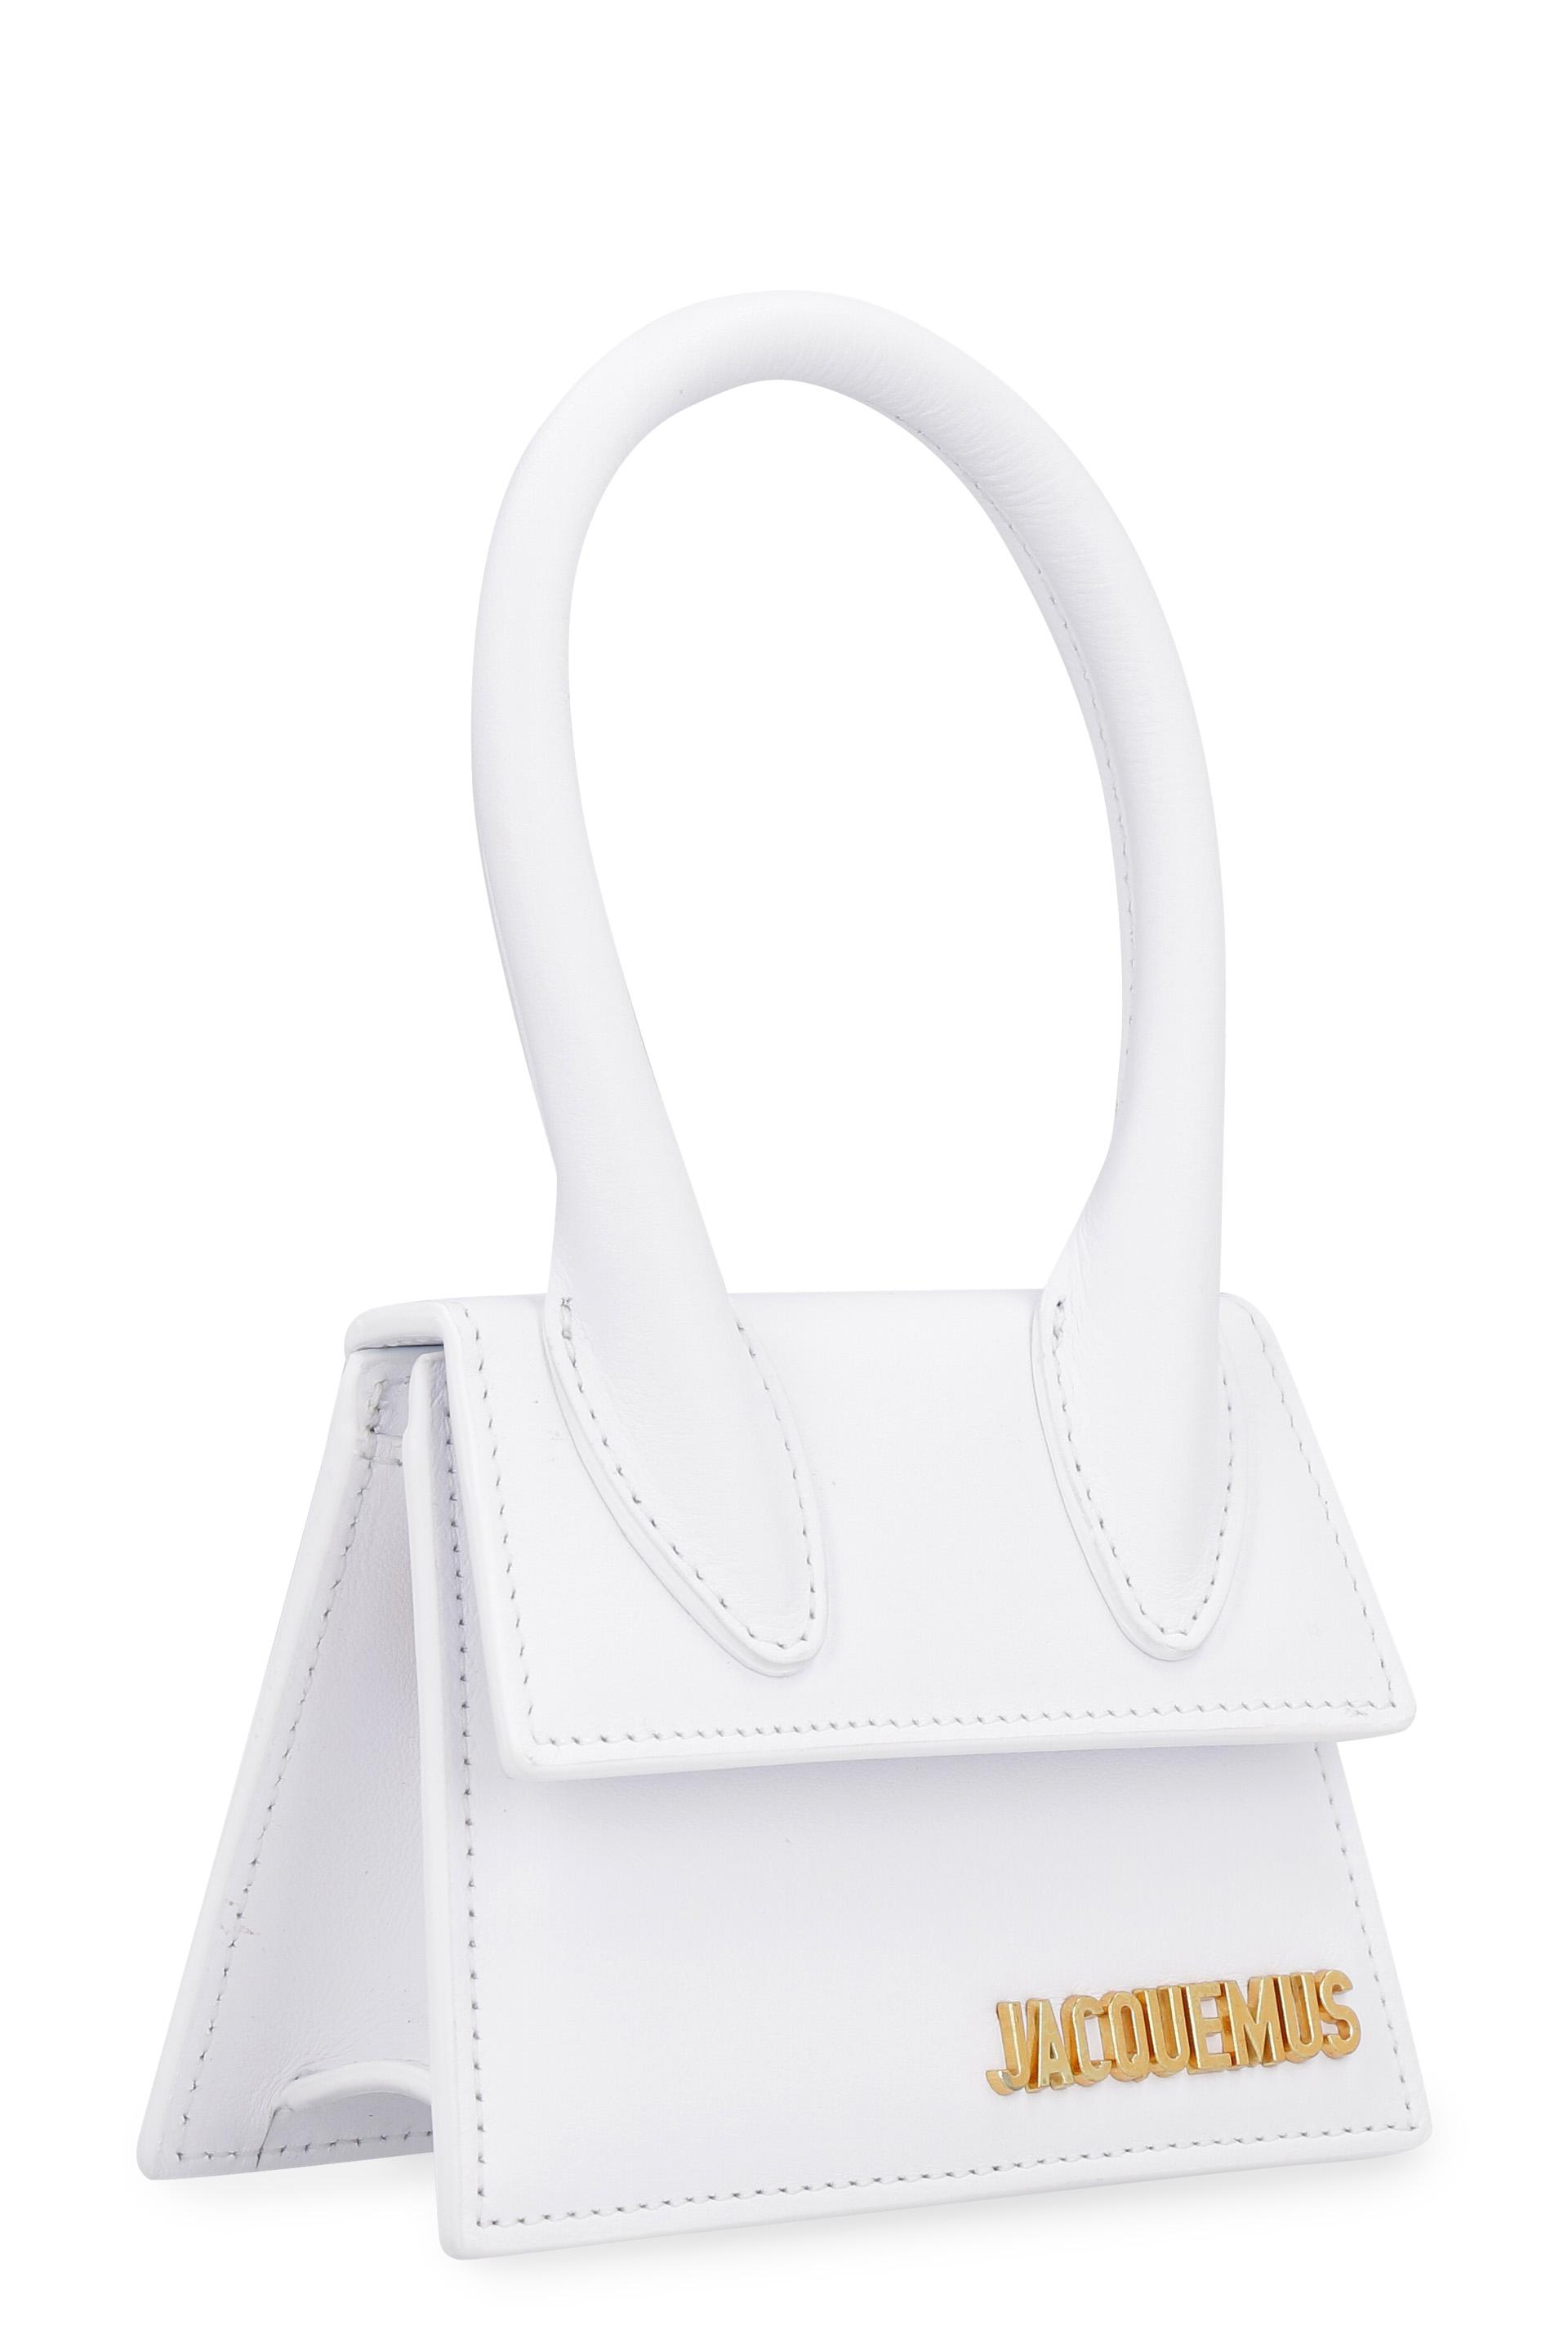 Jacquemus Le Chiquito Leather Top-handle Bag in White | Lyst